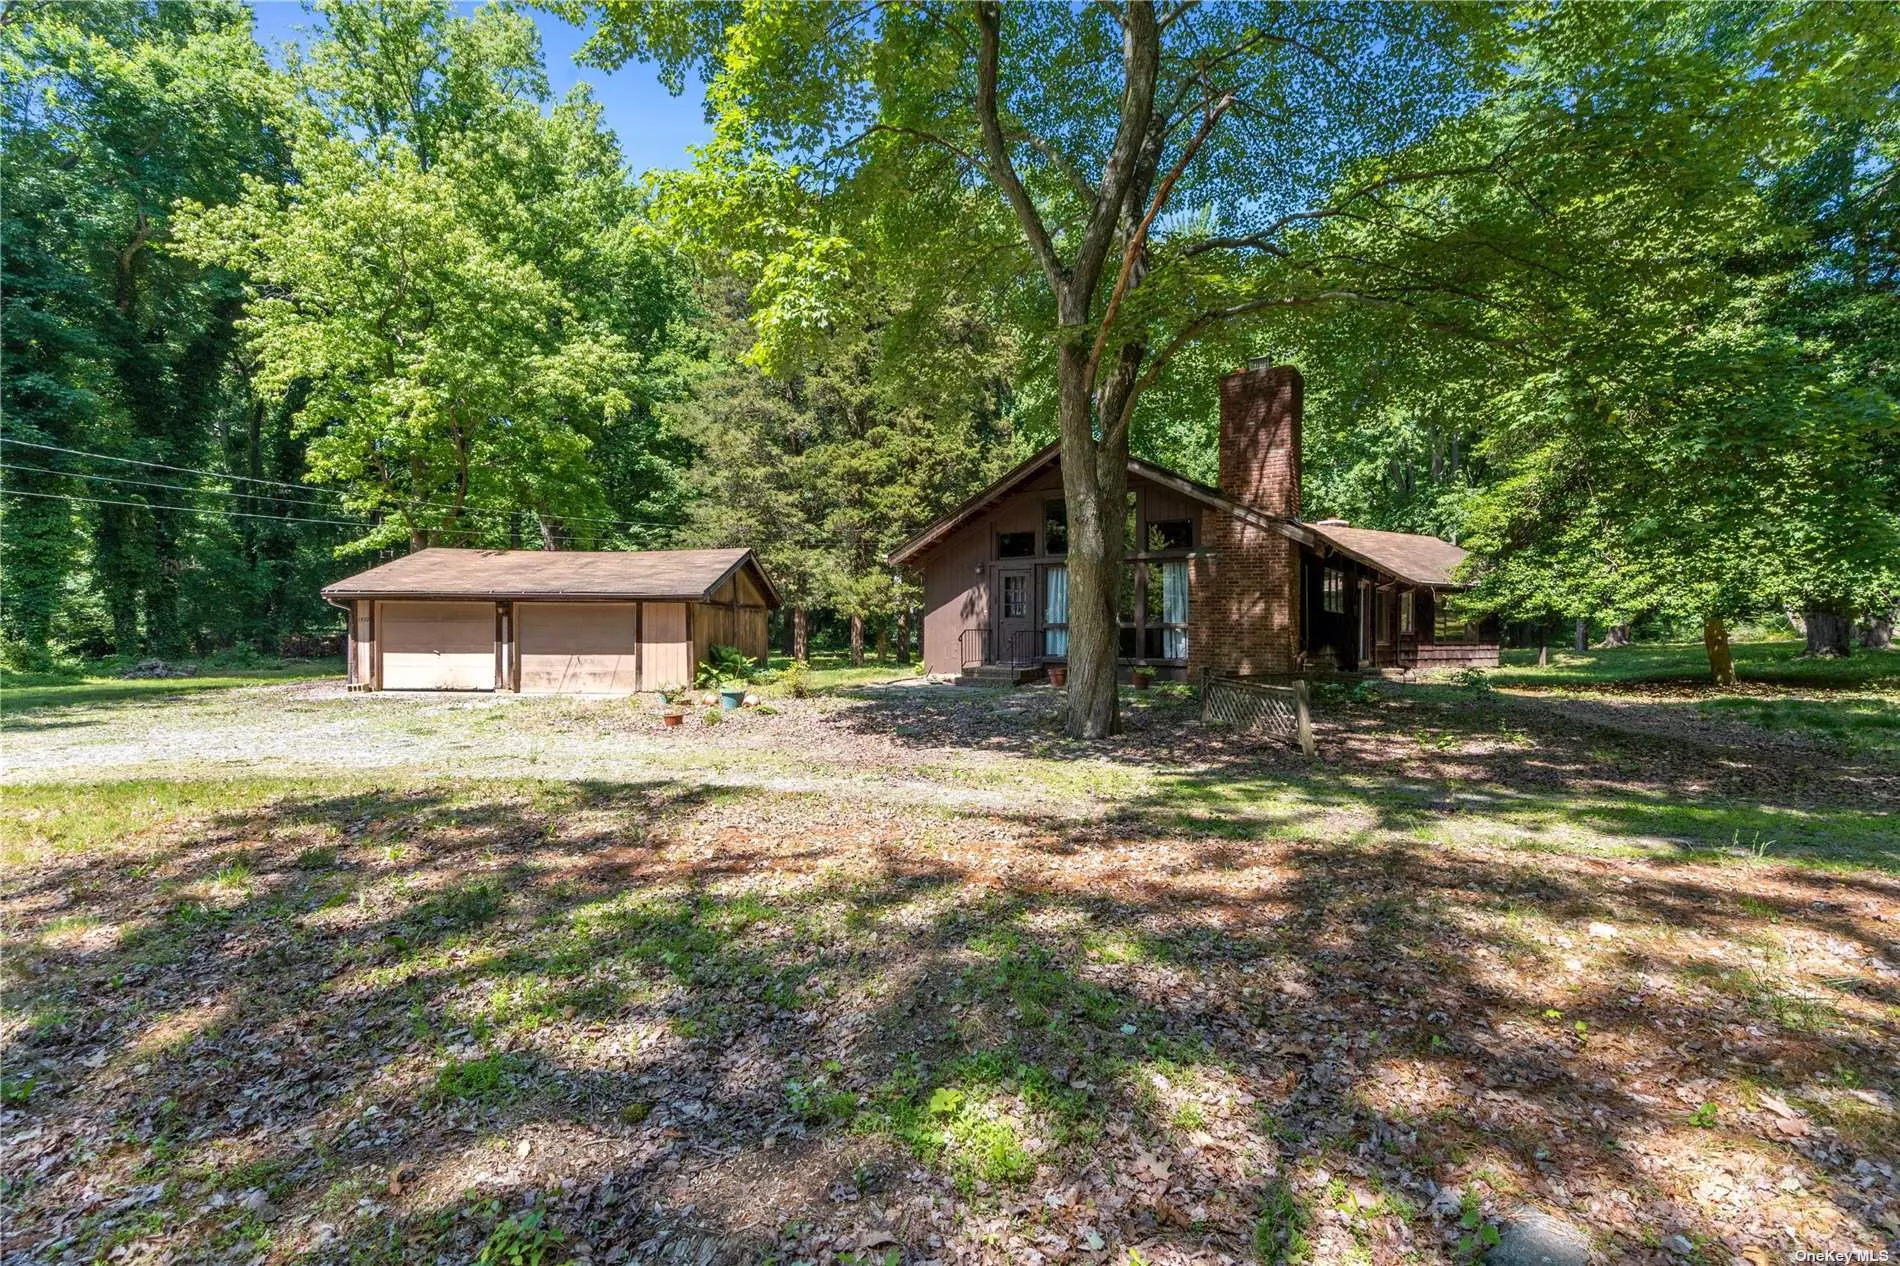 Prime Location!! Amazing Opportunity For Either an End User or Builder-Developer. Build Your Own Dream Home on 2.65 Flat Usable Acres situated in the sought-after Village of Laurel Hollow/Cold Spring Harbor School District. 2 minutes from Laurel Hollow Beach (fee) with kayak storage and mooring rights, short walk from West Side School, 9 min from Syosset Train Station, and 5 min from Cold Spring Harbor Village. Surrounded By Multimillion Dollar Homes. Barn on property. House/Land Sold As Is